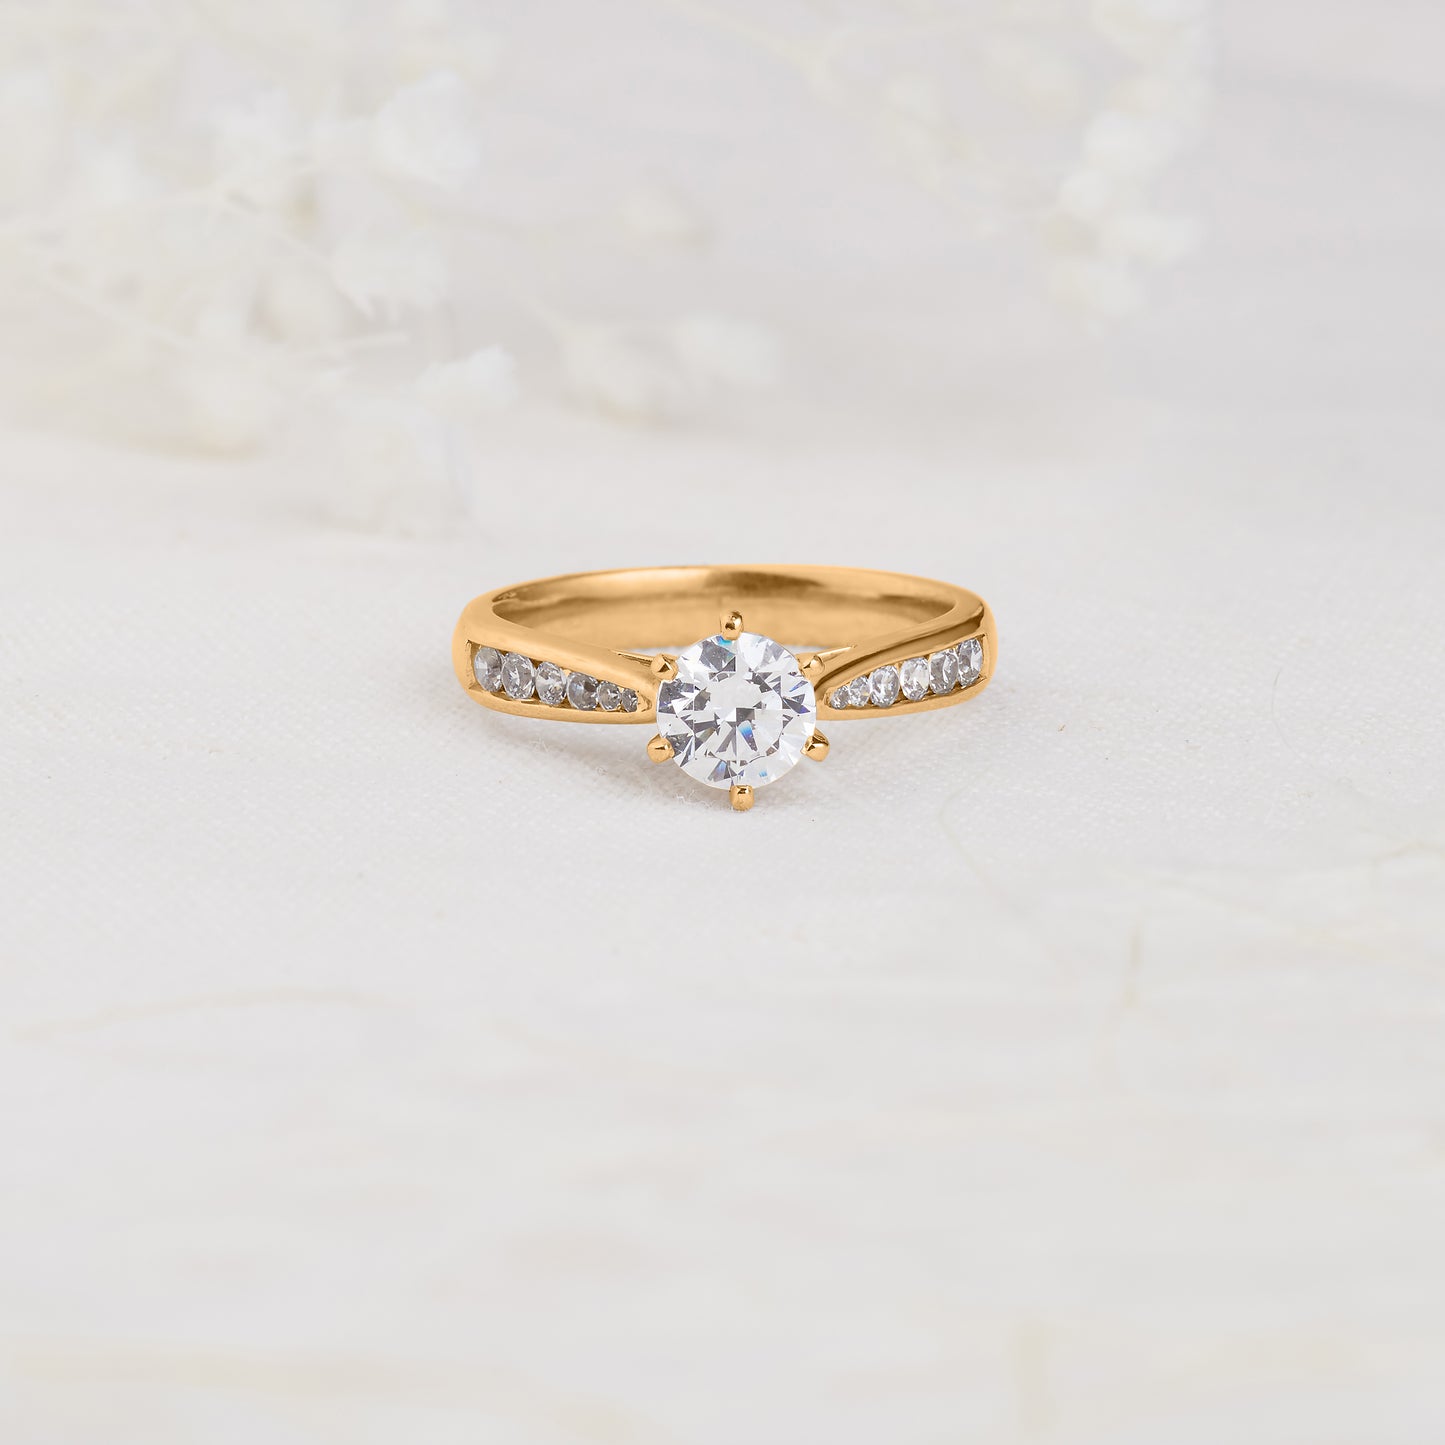 18K Yellow Gold Round Brilliant Diamond Solitaire With Shoulder Accents Engagement Ring 1.0tdw 0.8ct